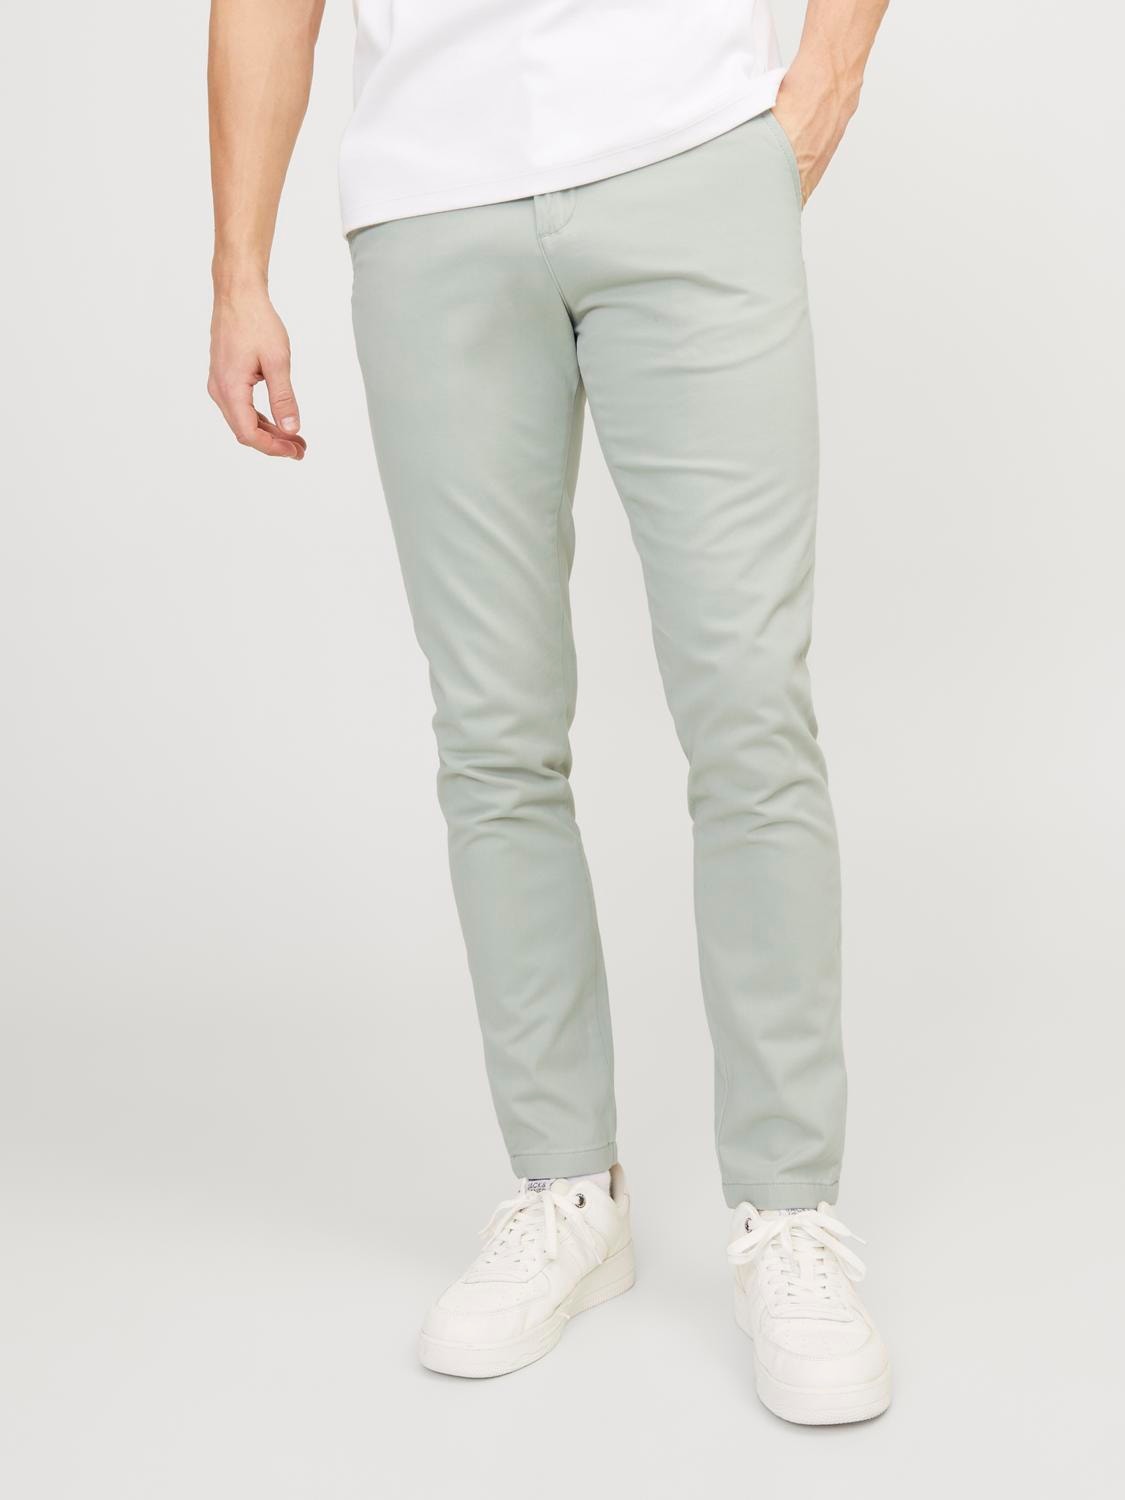 The Worn By Nature Chino Pantalón Casual Hombre Freeport PZAE